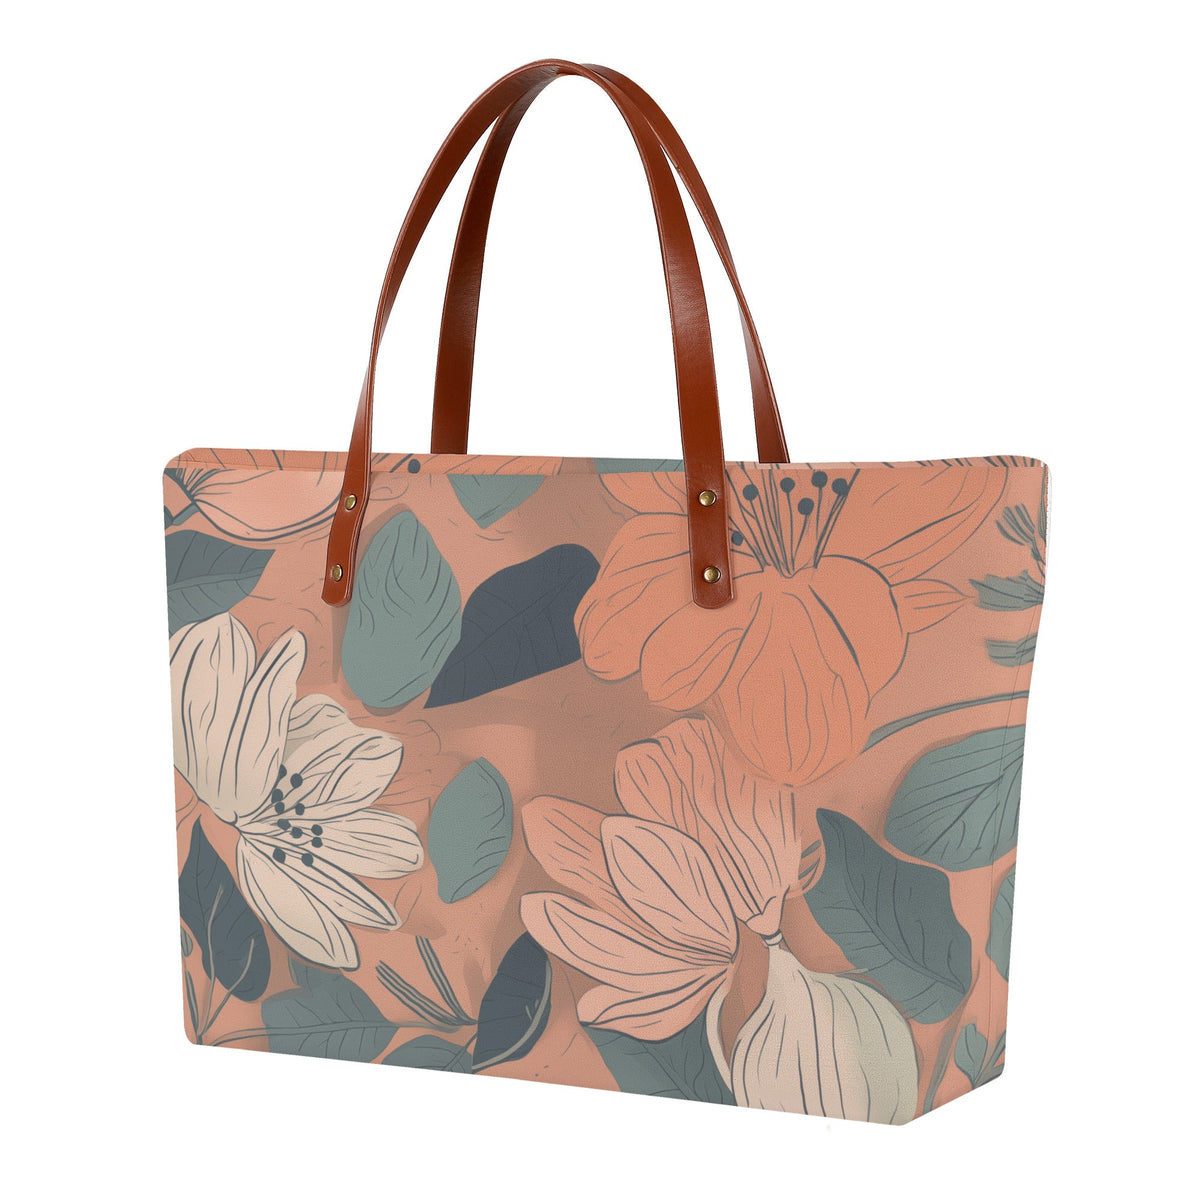 Petal Pink Floral Vegan Leather Tote Bag | Hypoallergenic - Allergy Friendly - Naturally Free